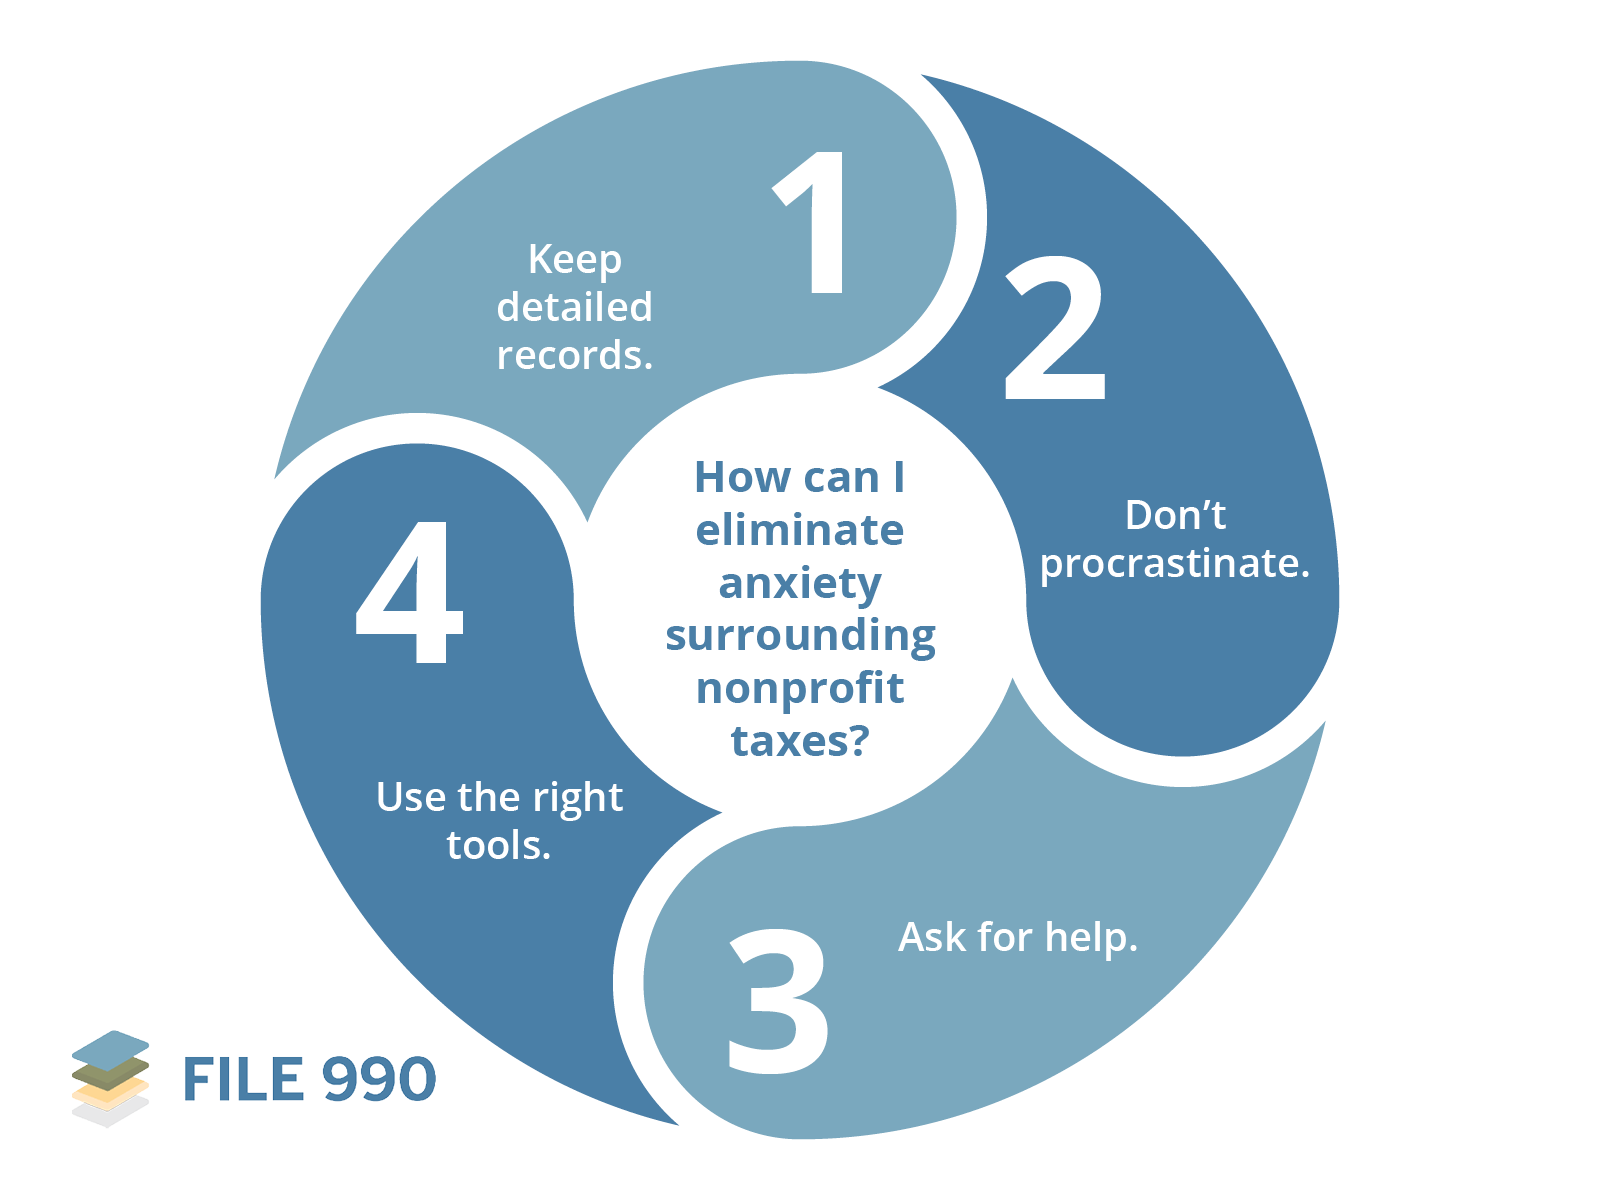 You can eliminate anxiety surrounding nonprofit taxes and figure out the difference between 990-EZ vs 990-N by keeping detailed records, avoiding procrastination, and asking for help.